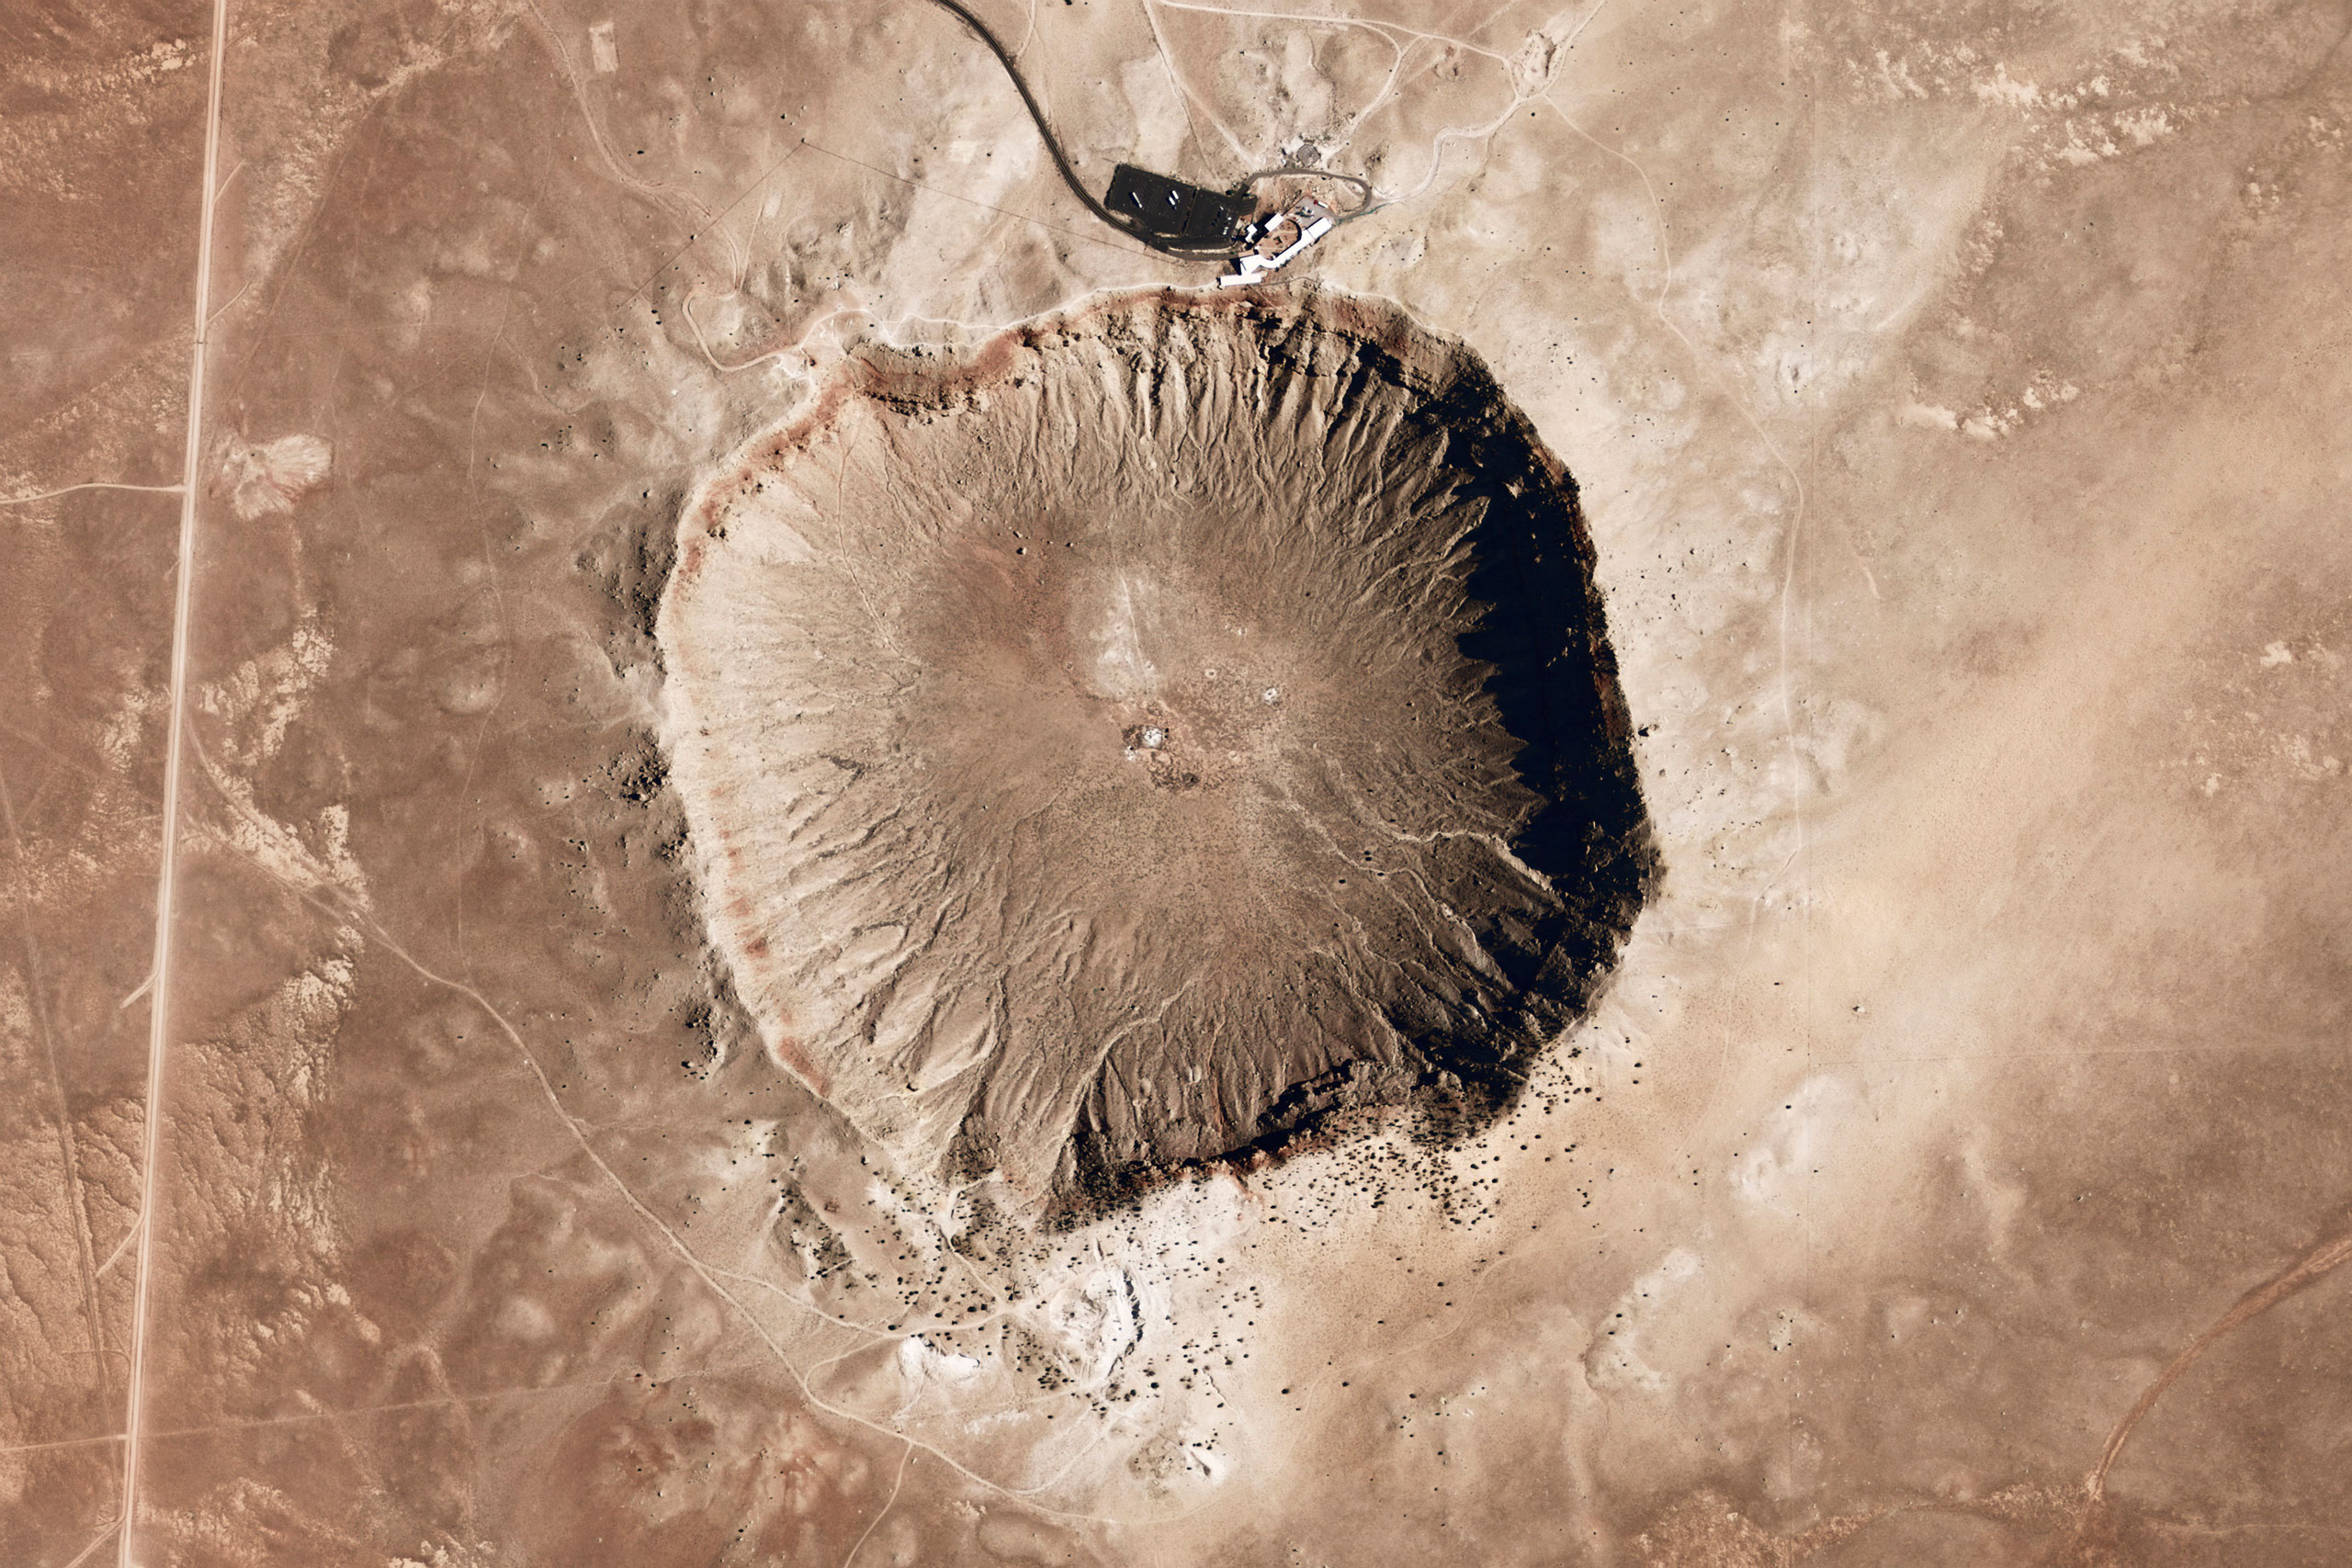 Barringer impact structure (also known as Meteor Crater) in Arizona. It is 49,000 years old and has a diameter of 1186 km.